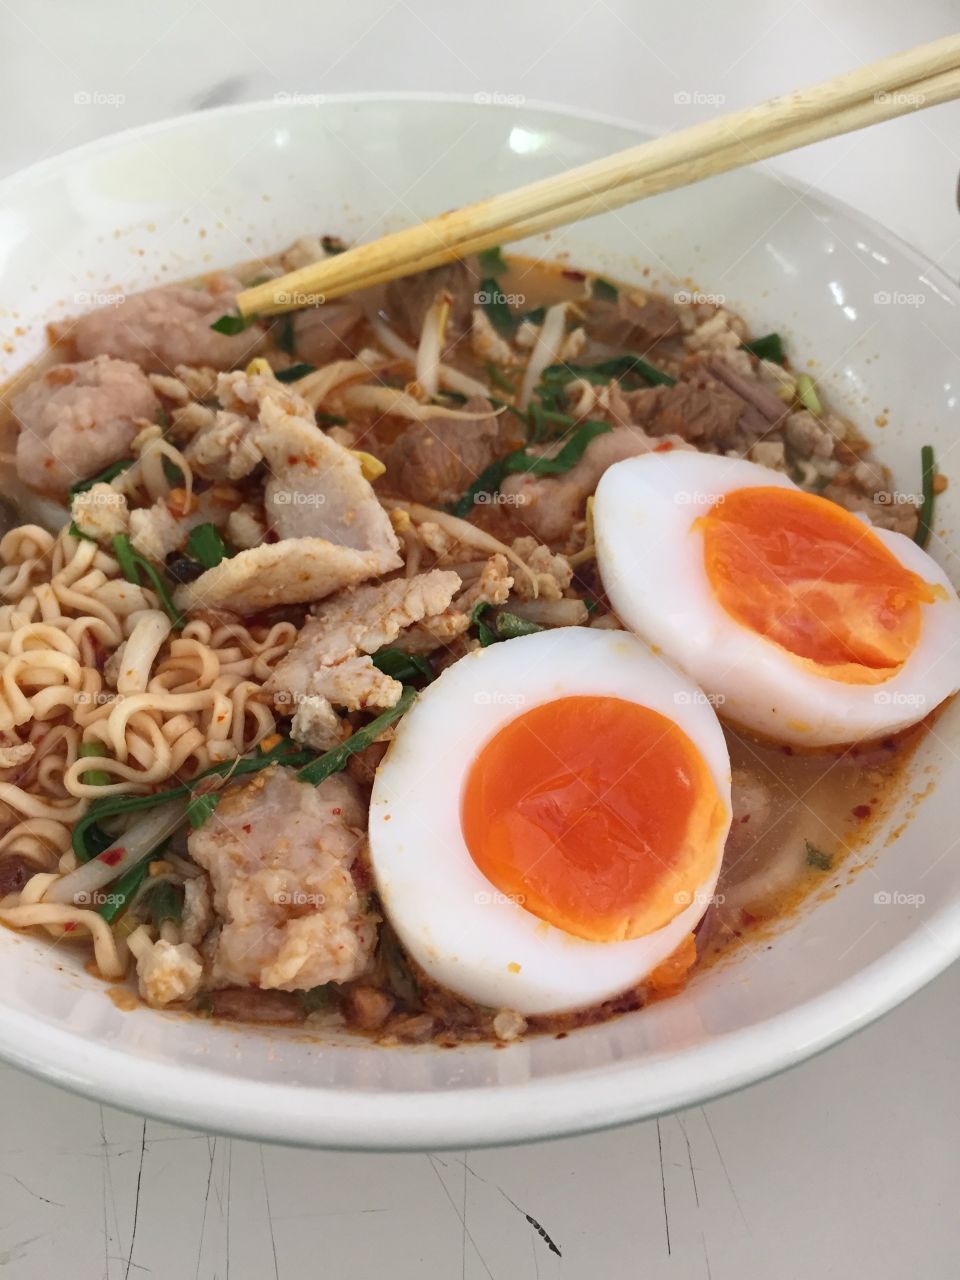 Tomyan noodle from Thailand with egg boiled and pork tested soo spicy